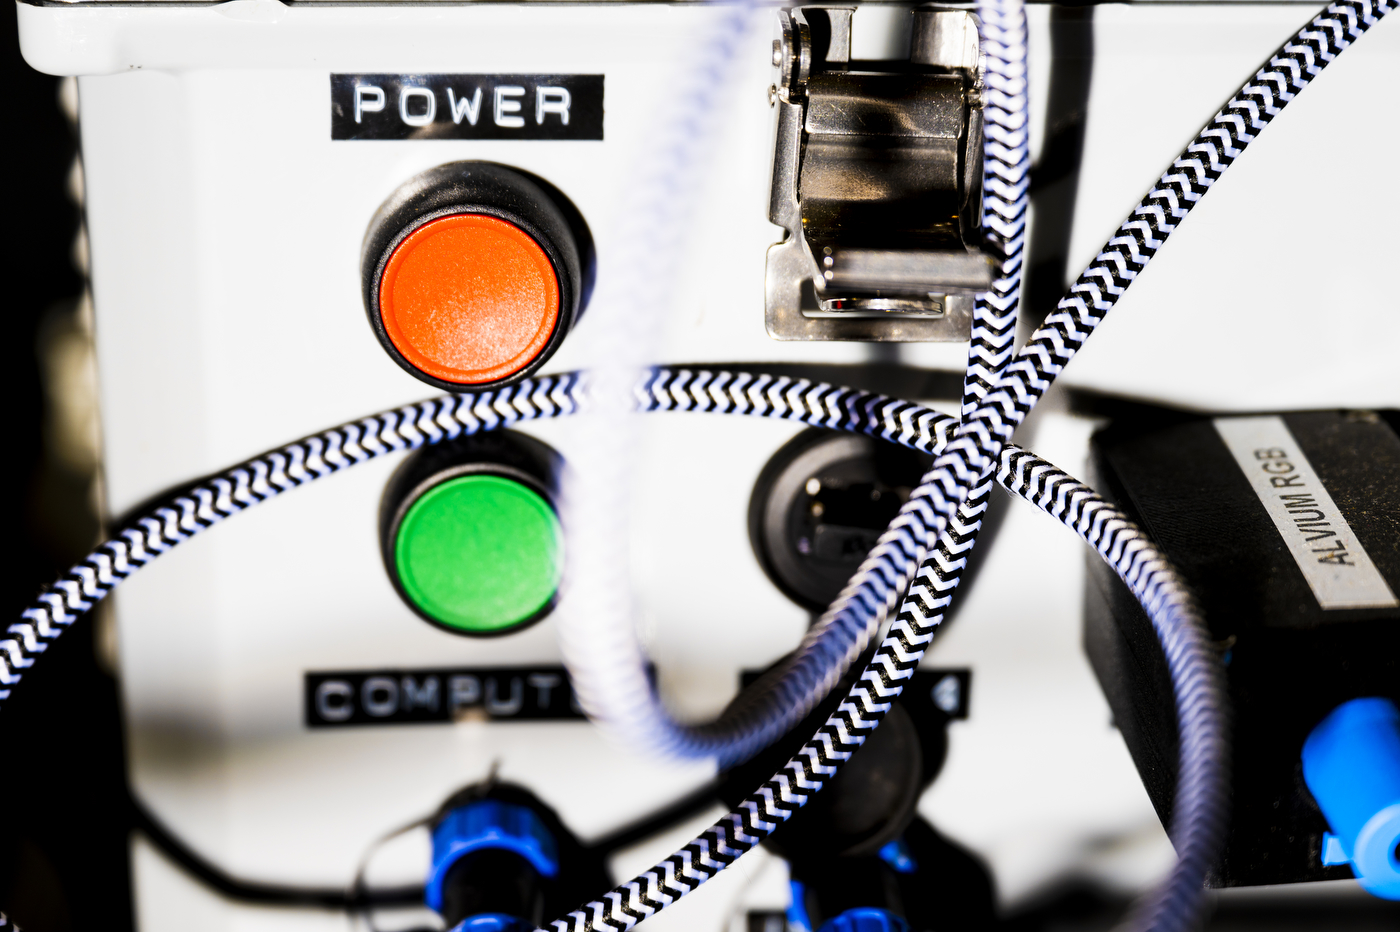 A label called "power" is placed above the red and green buttons on a robotic machine.

A label called "power" is placed above the red and green buttons on a robotic machine.